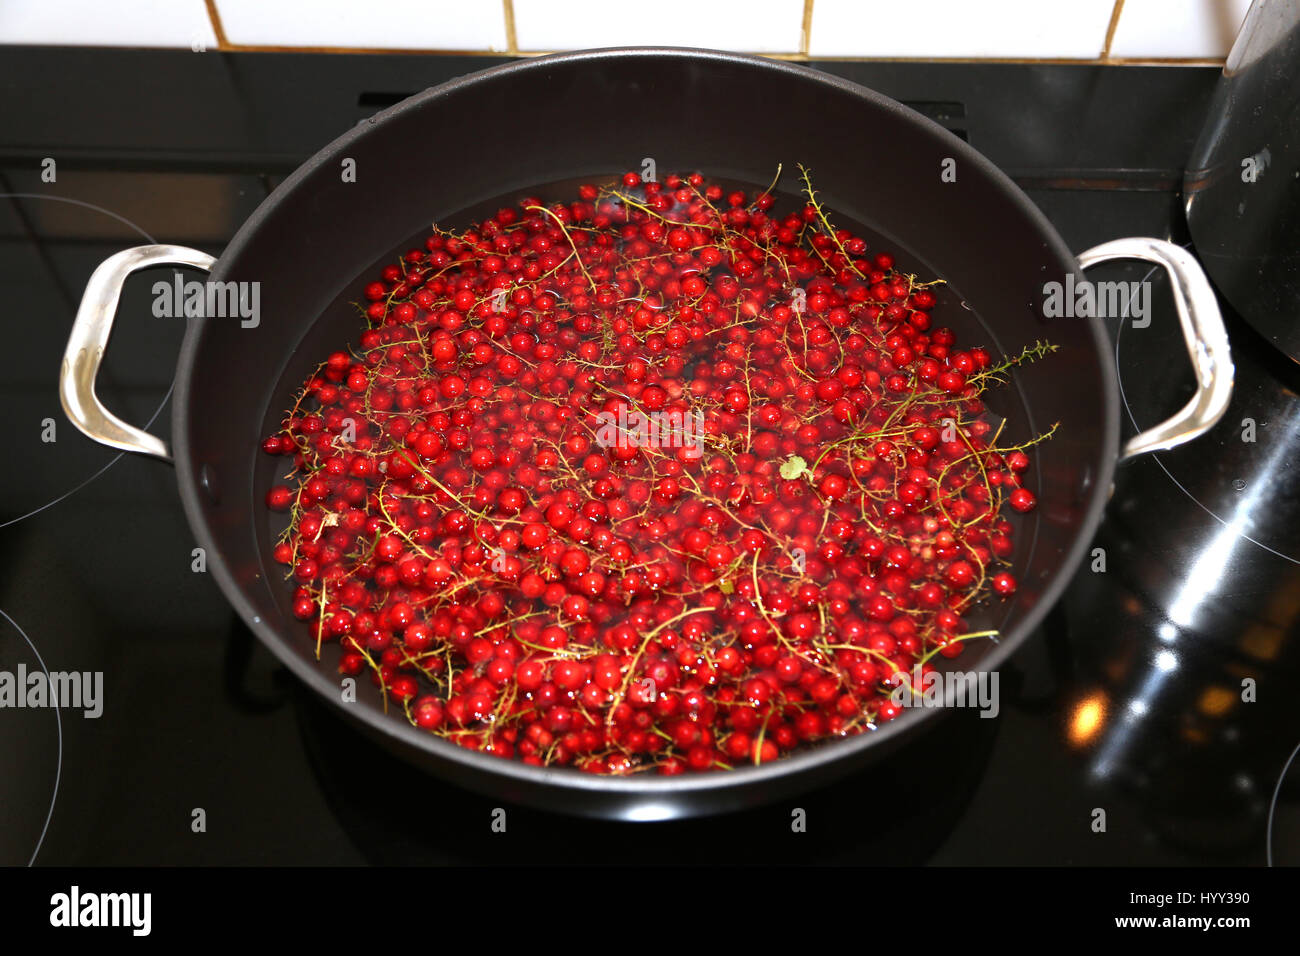 Making Redcurrent Jelly - Redcurrents In Pan On Electric Hob Stock Photo